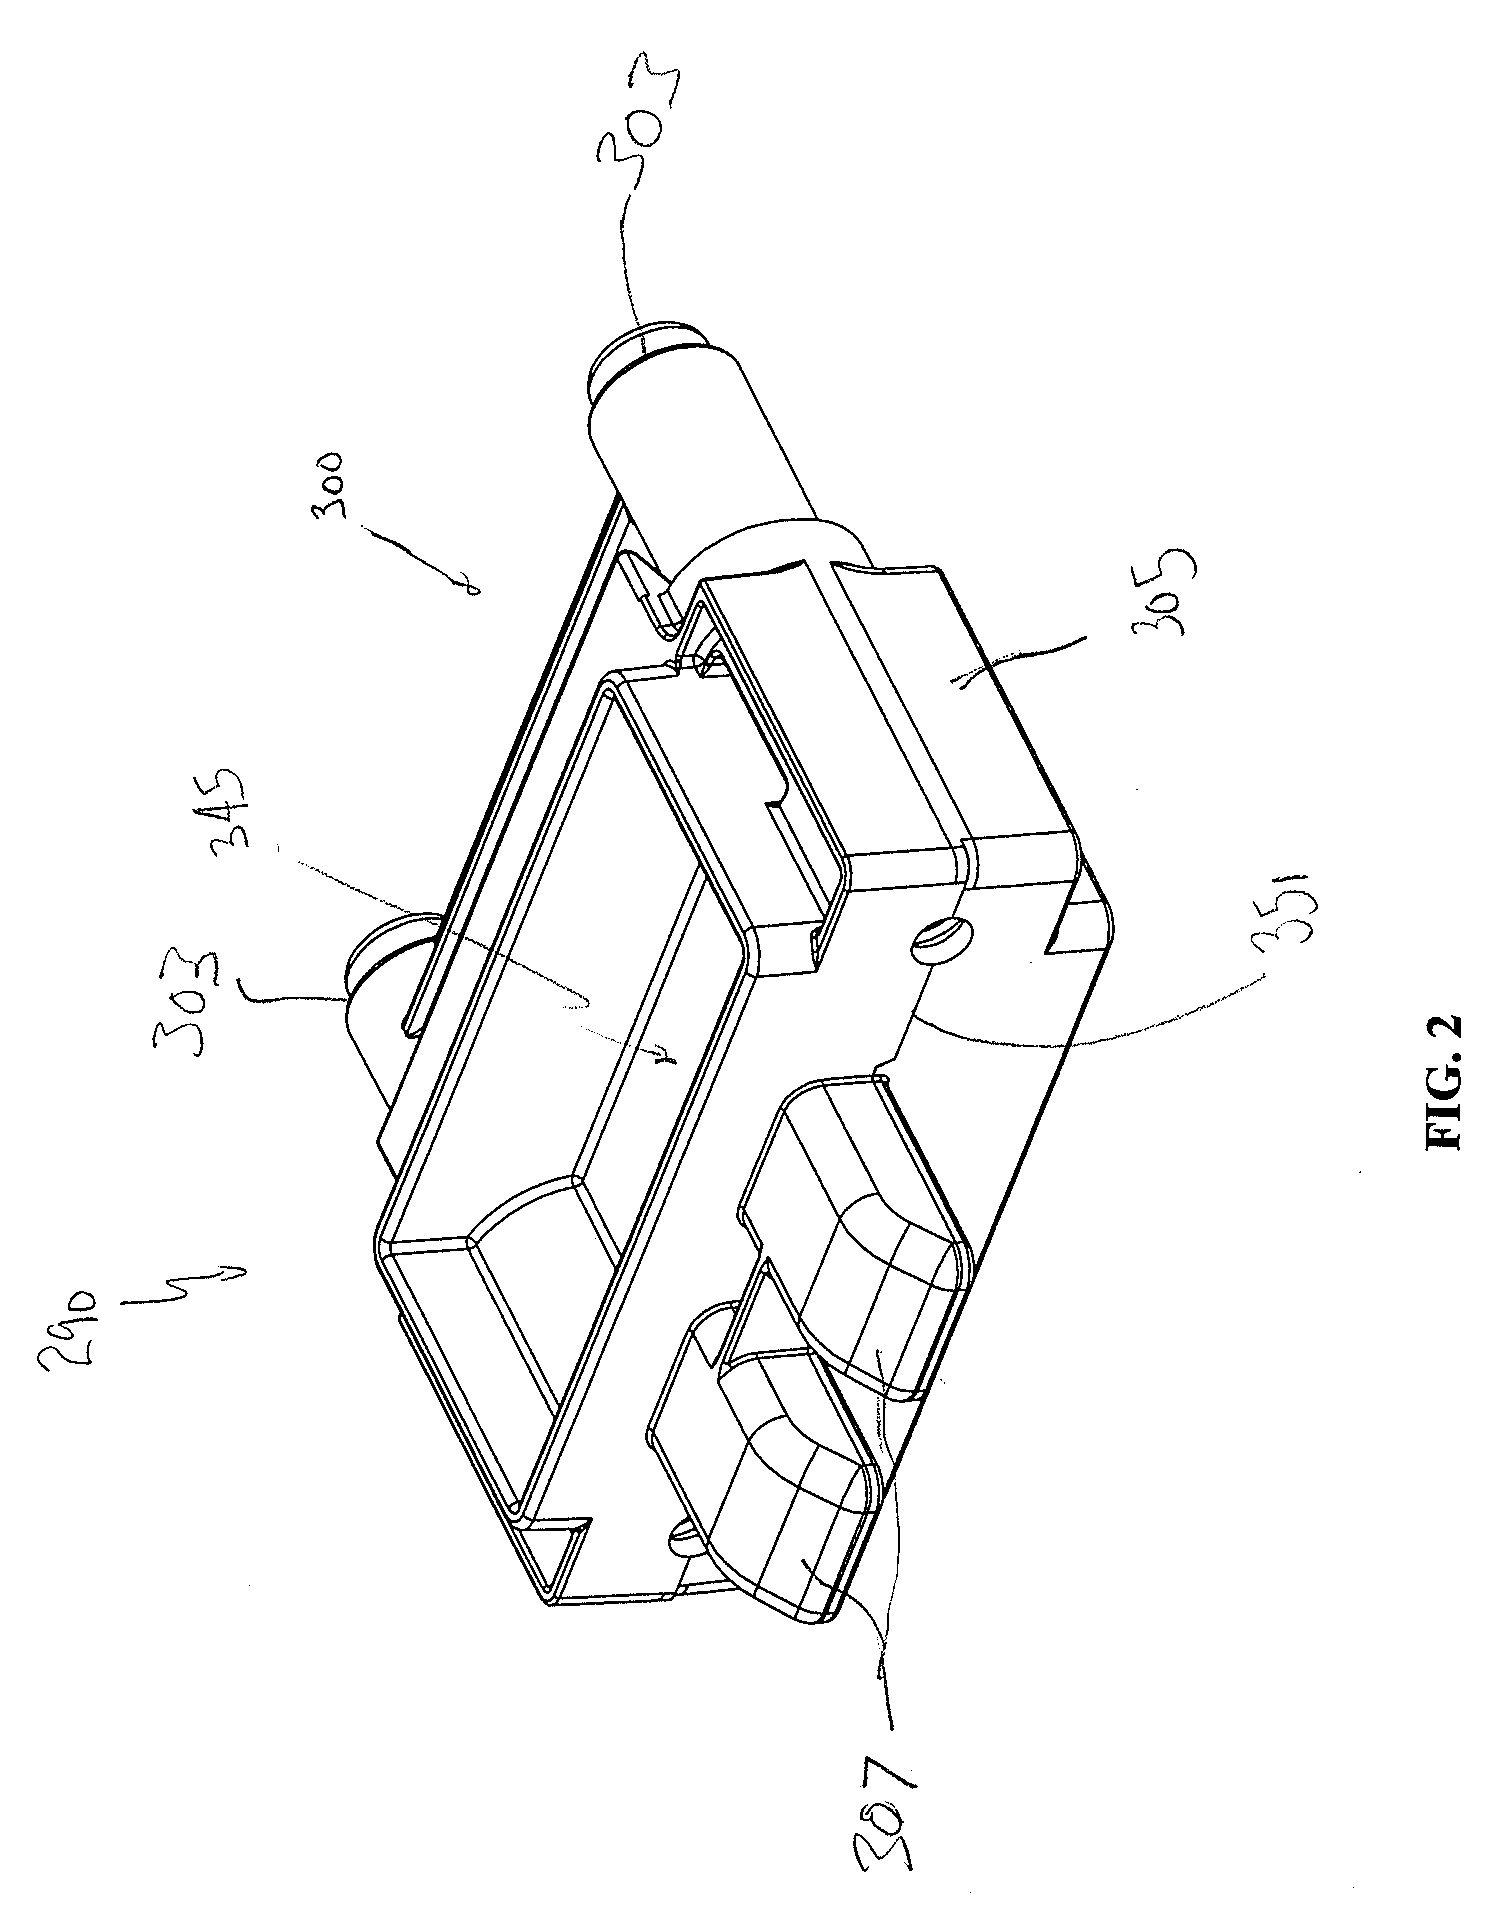 Container assembly and latch apparatus, and related methods